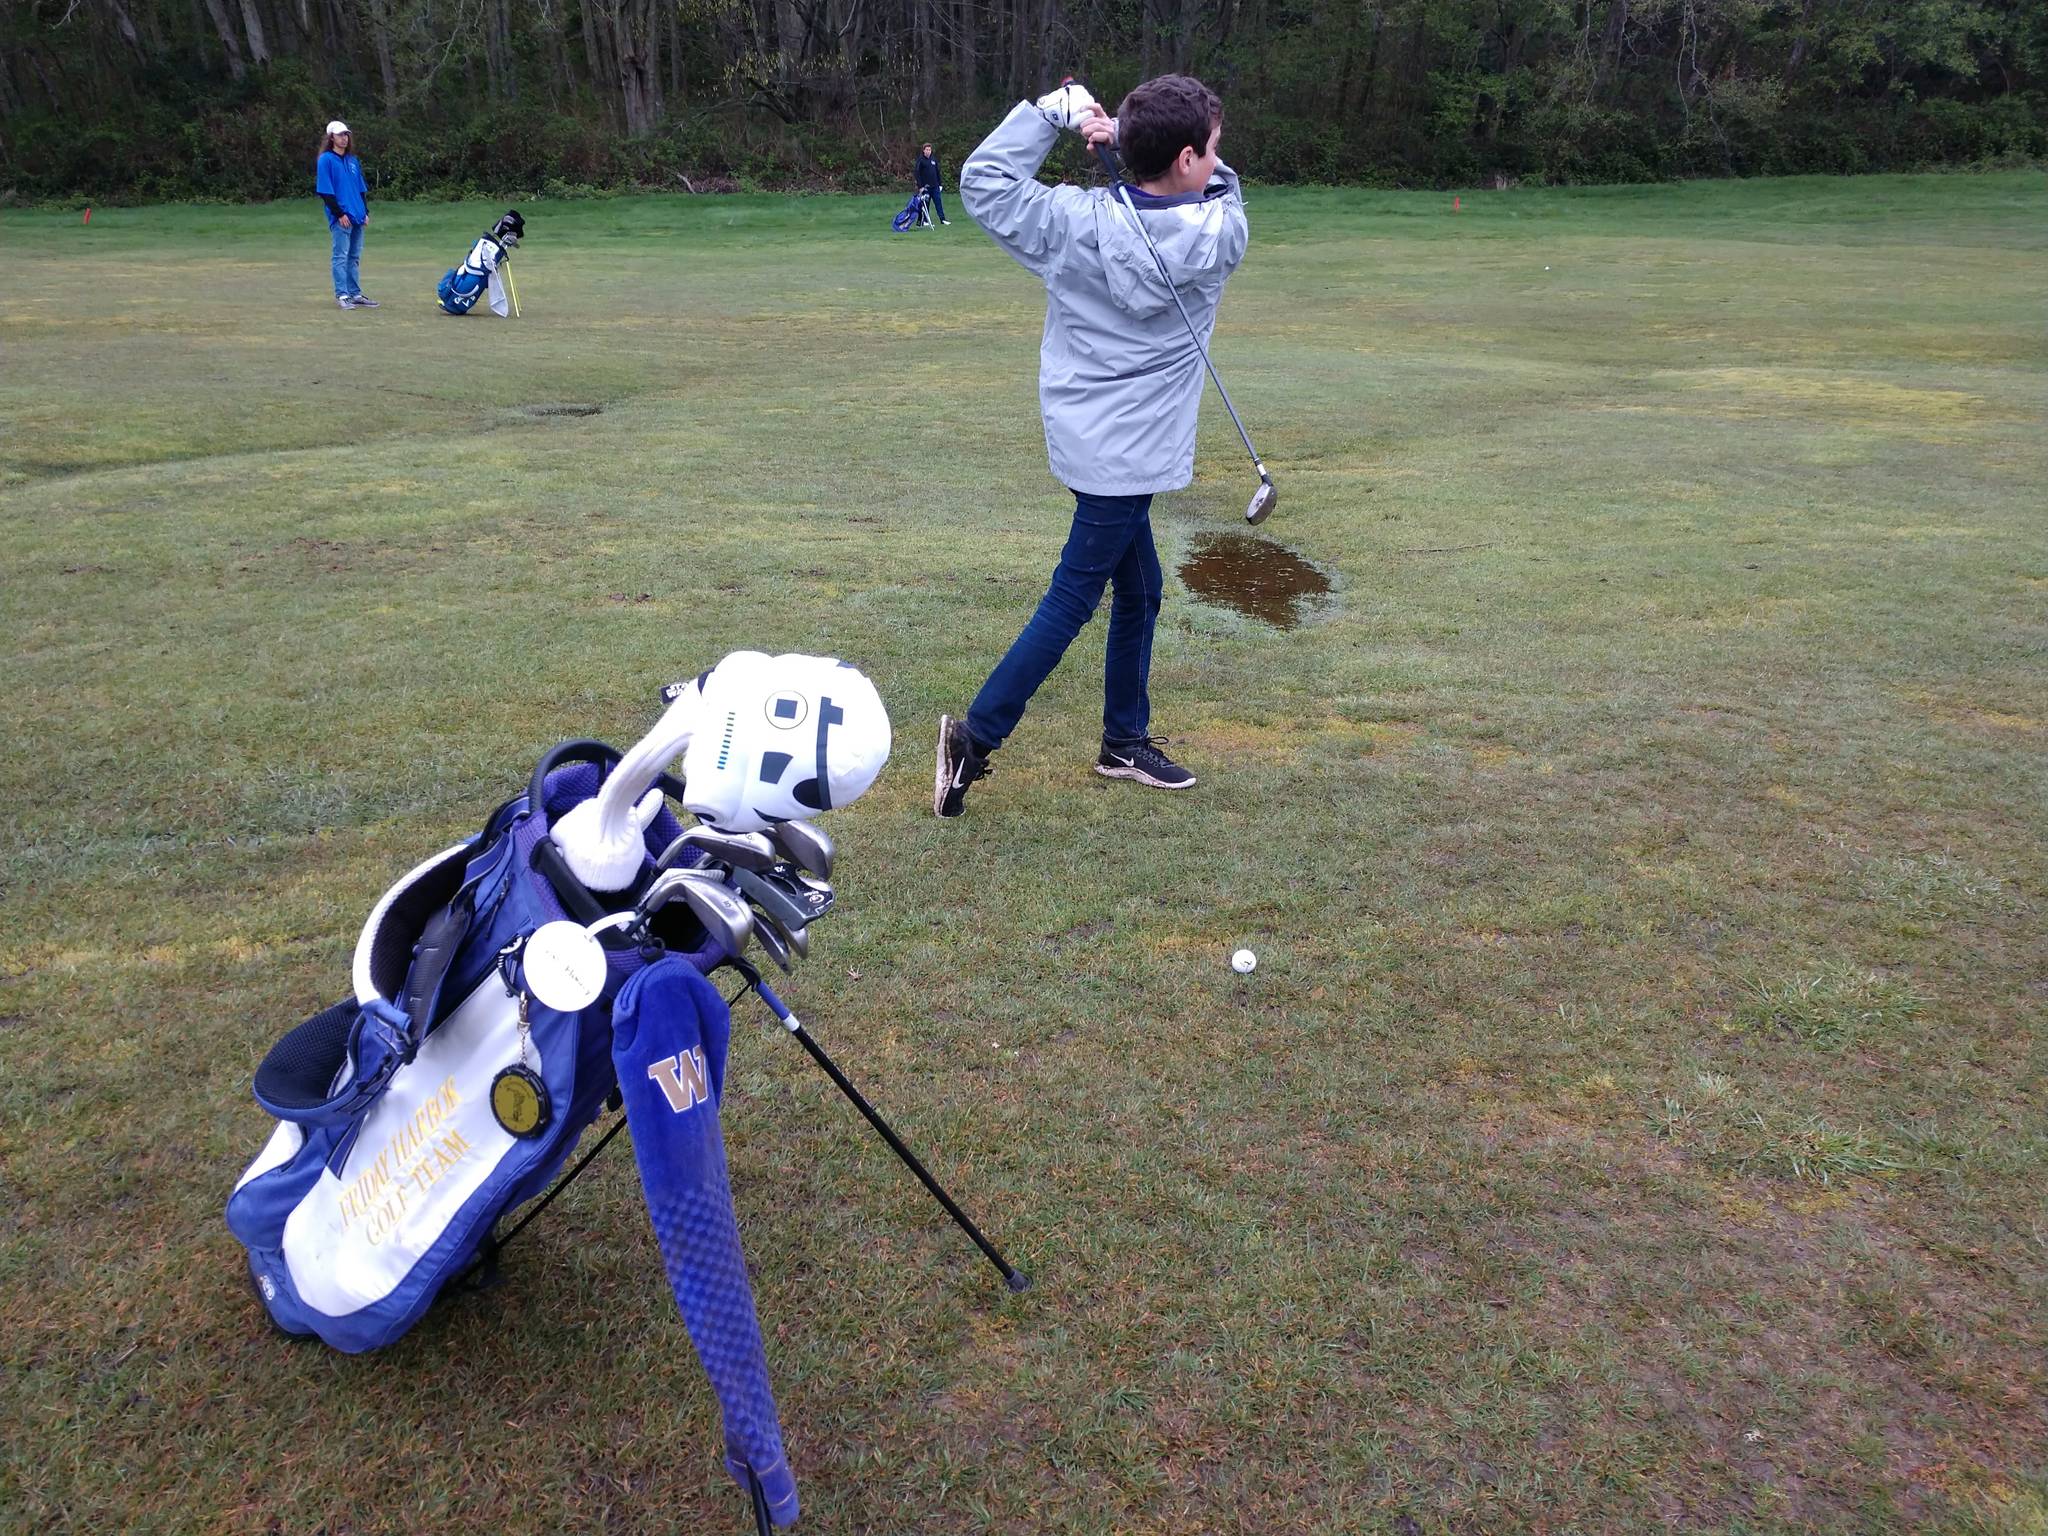 Golf team ties with Mount Vernon in mid-season home game